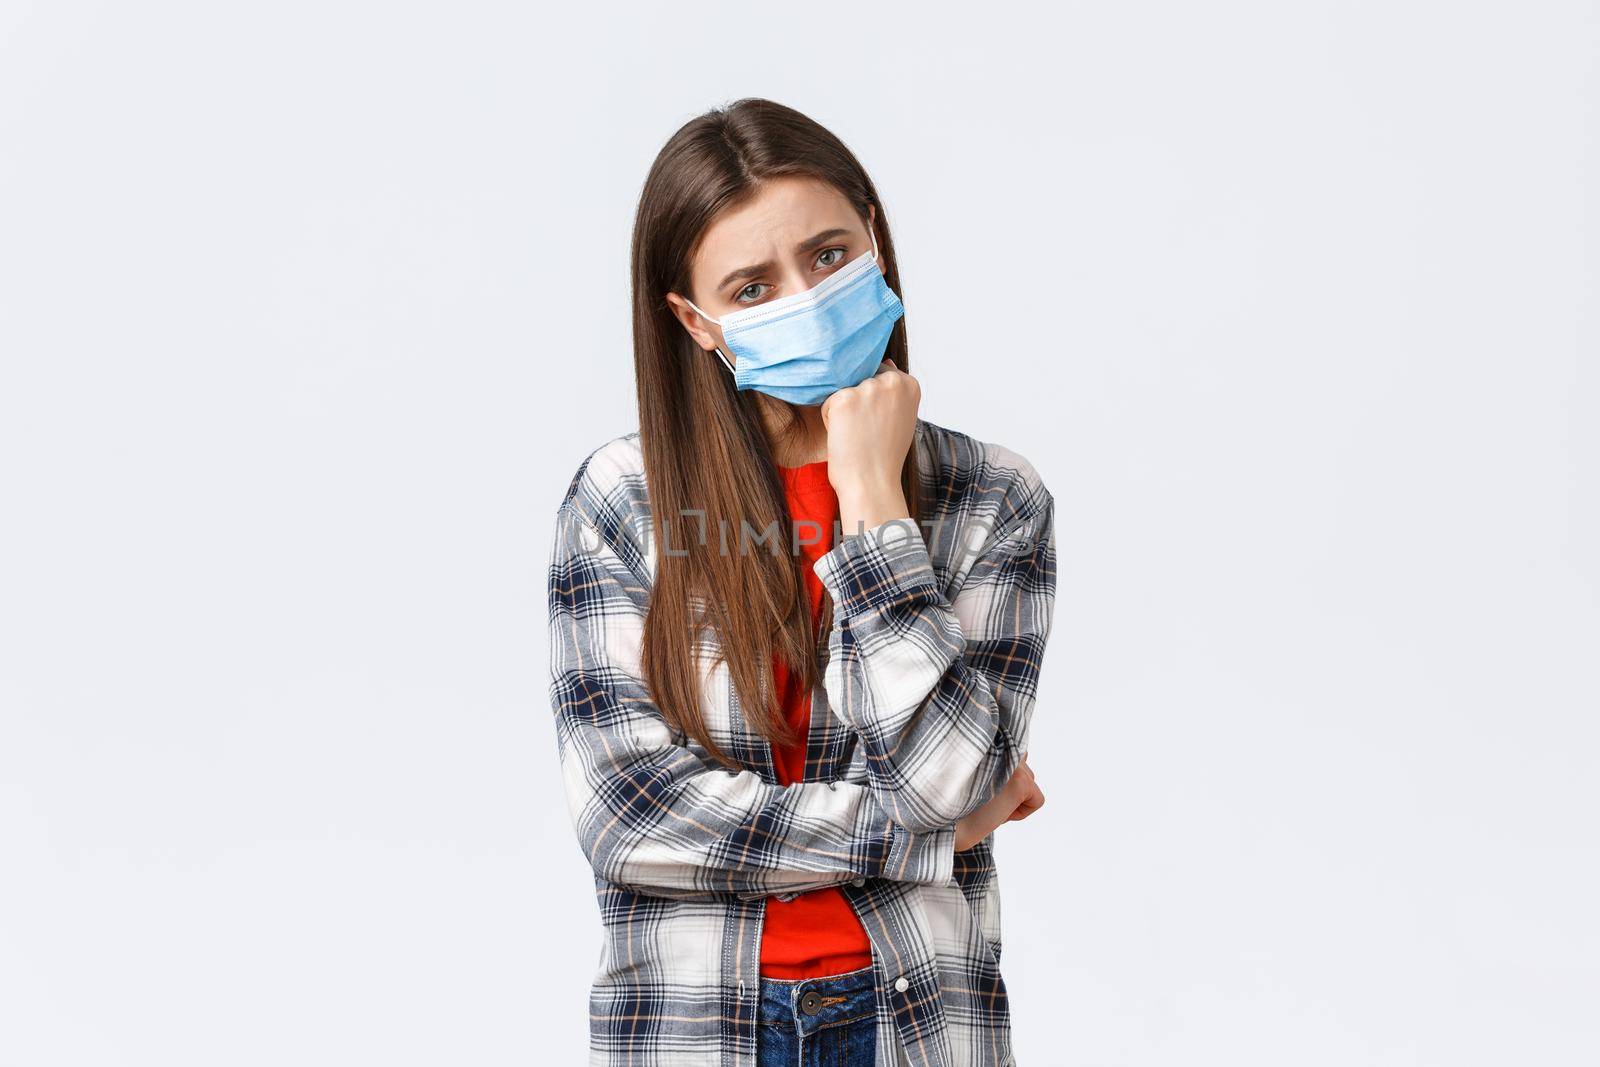 Coronavirus outbreak, leisure on quarantine, social distancing and emotions concept. Sad and bored young gloomy girl in medical mask lean on hand and looking unamused camera.